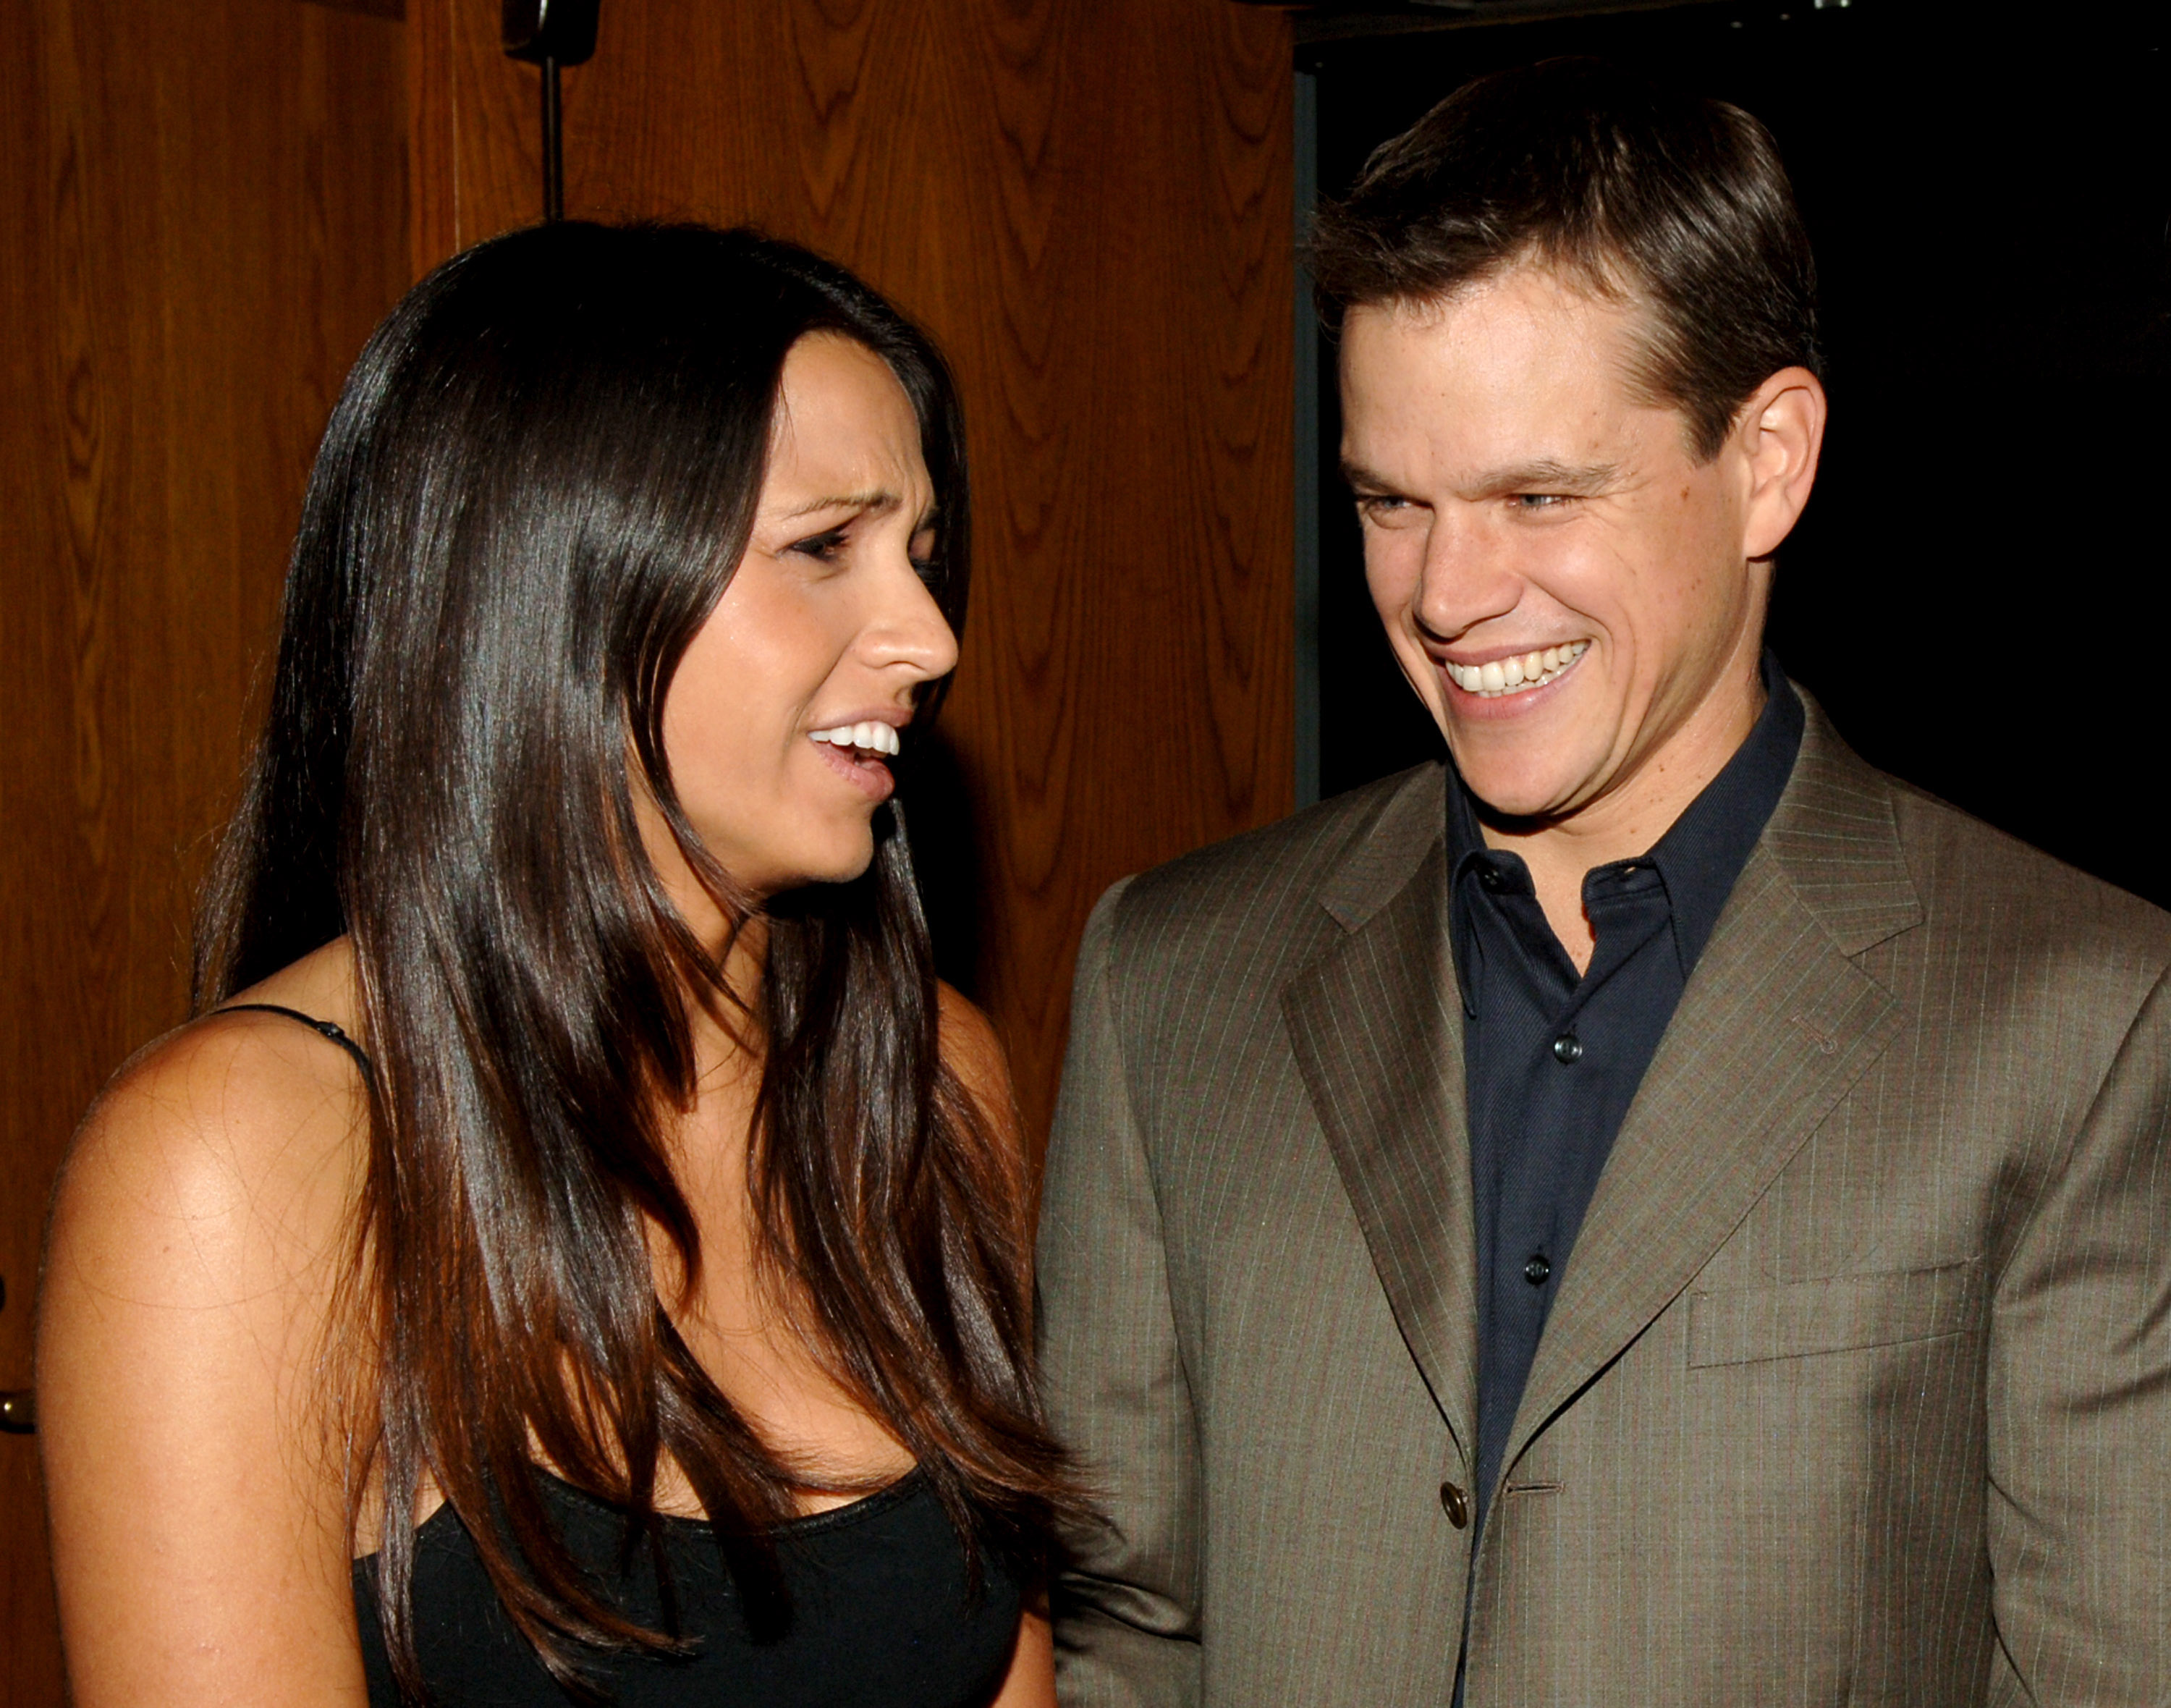 Luciana Barroso and Matt Damon at the after-party of the premiere of "The Brothers Grimm" in Los Angeles, 2005. | Source: Getty Images